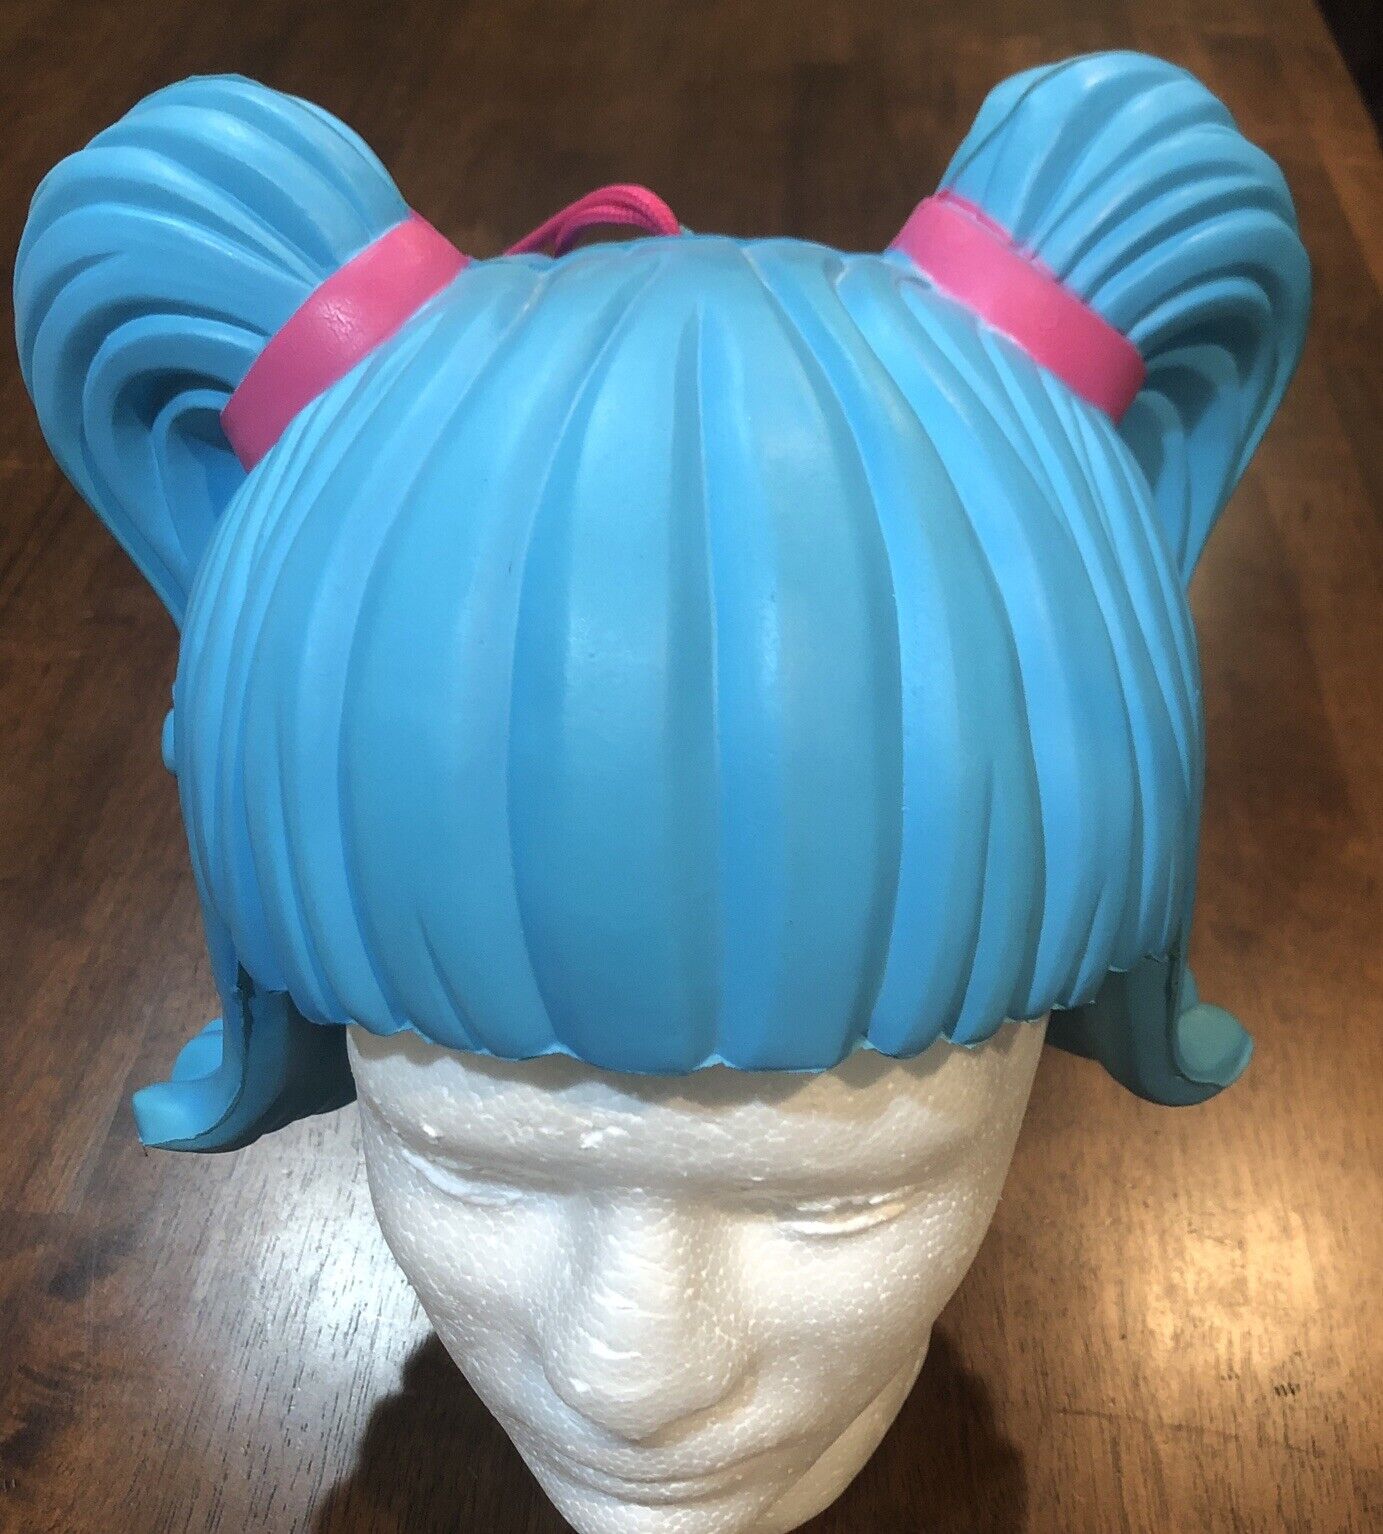 2005 Toy Quest Wig Blue Pink Pigtails Anime Cosplay Hair Hard Foam One Size